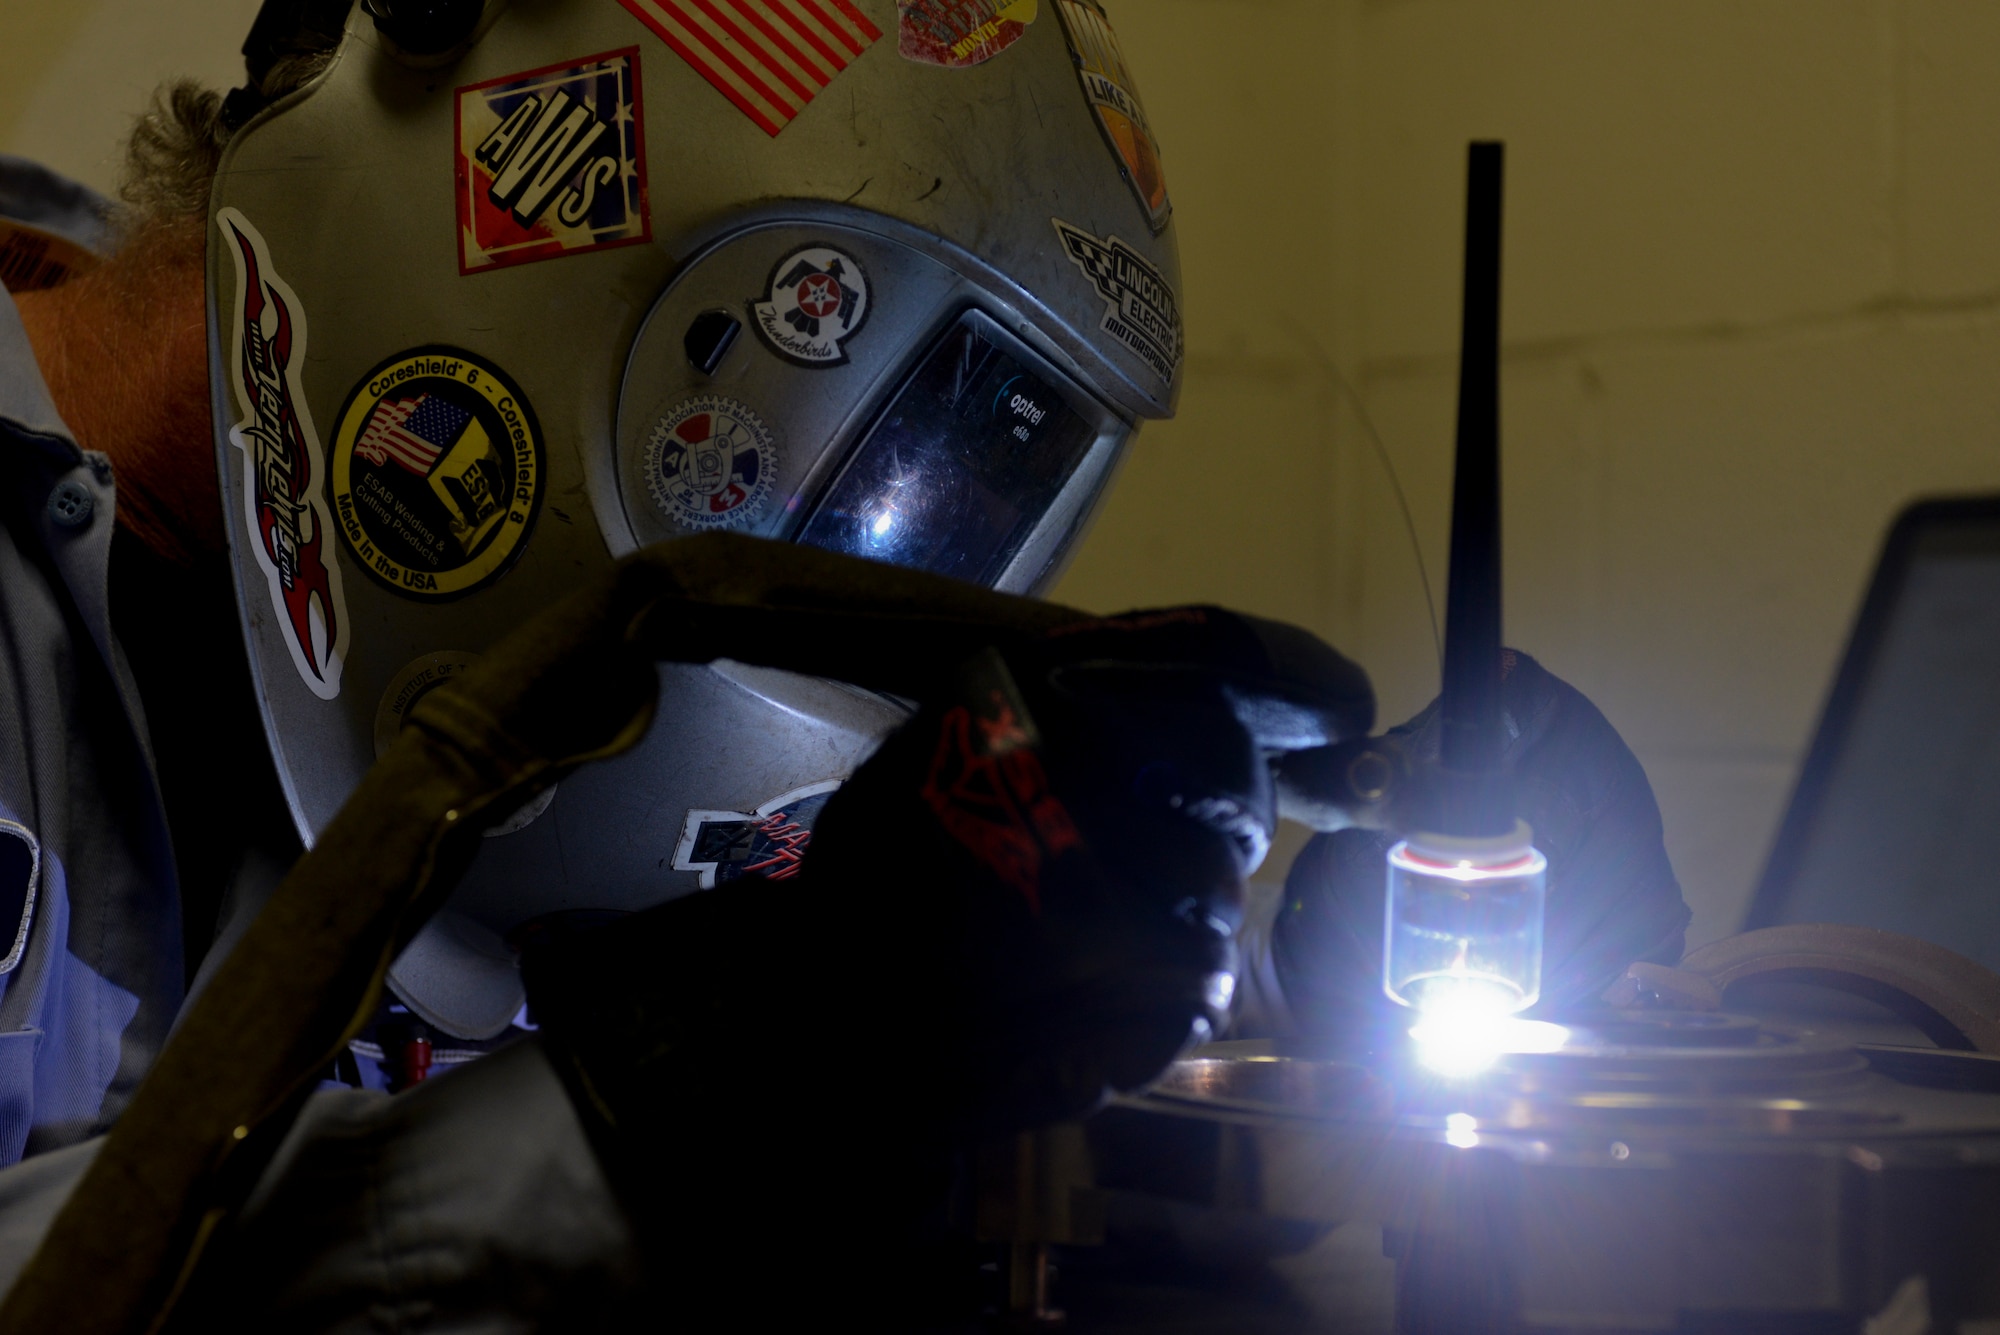 Rich Samanich, 57th Maintanence Group aircraft metals technology lead, welds cracks on an aircraft part at the Aircraft Metals Technology shop on Nellis Air Force Base, Nev., Sept. 3, 2015. The aircraft metals technicians weld a multitude of equipment requiring precision and attention to detail. (U.S. Air Force photo by Airman 1st Class Mikaley Kline)